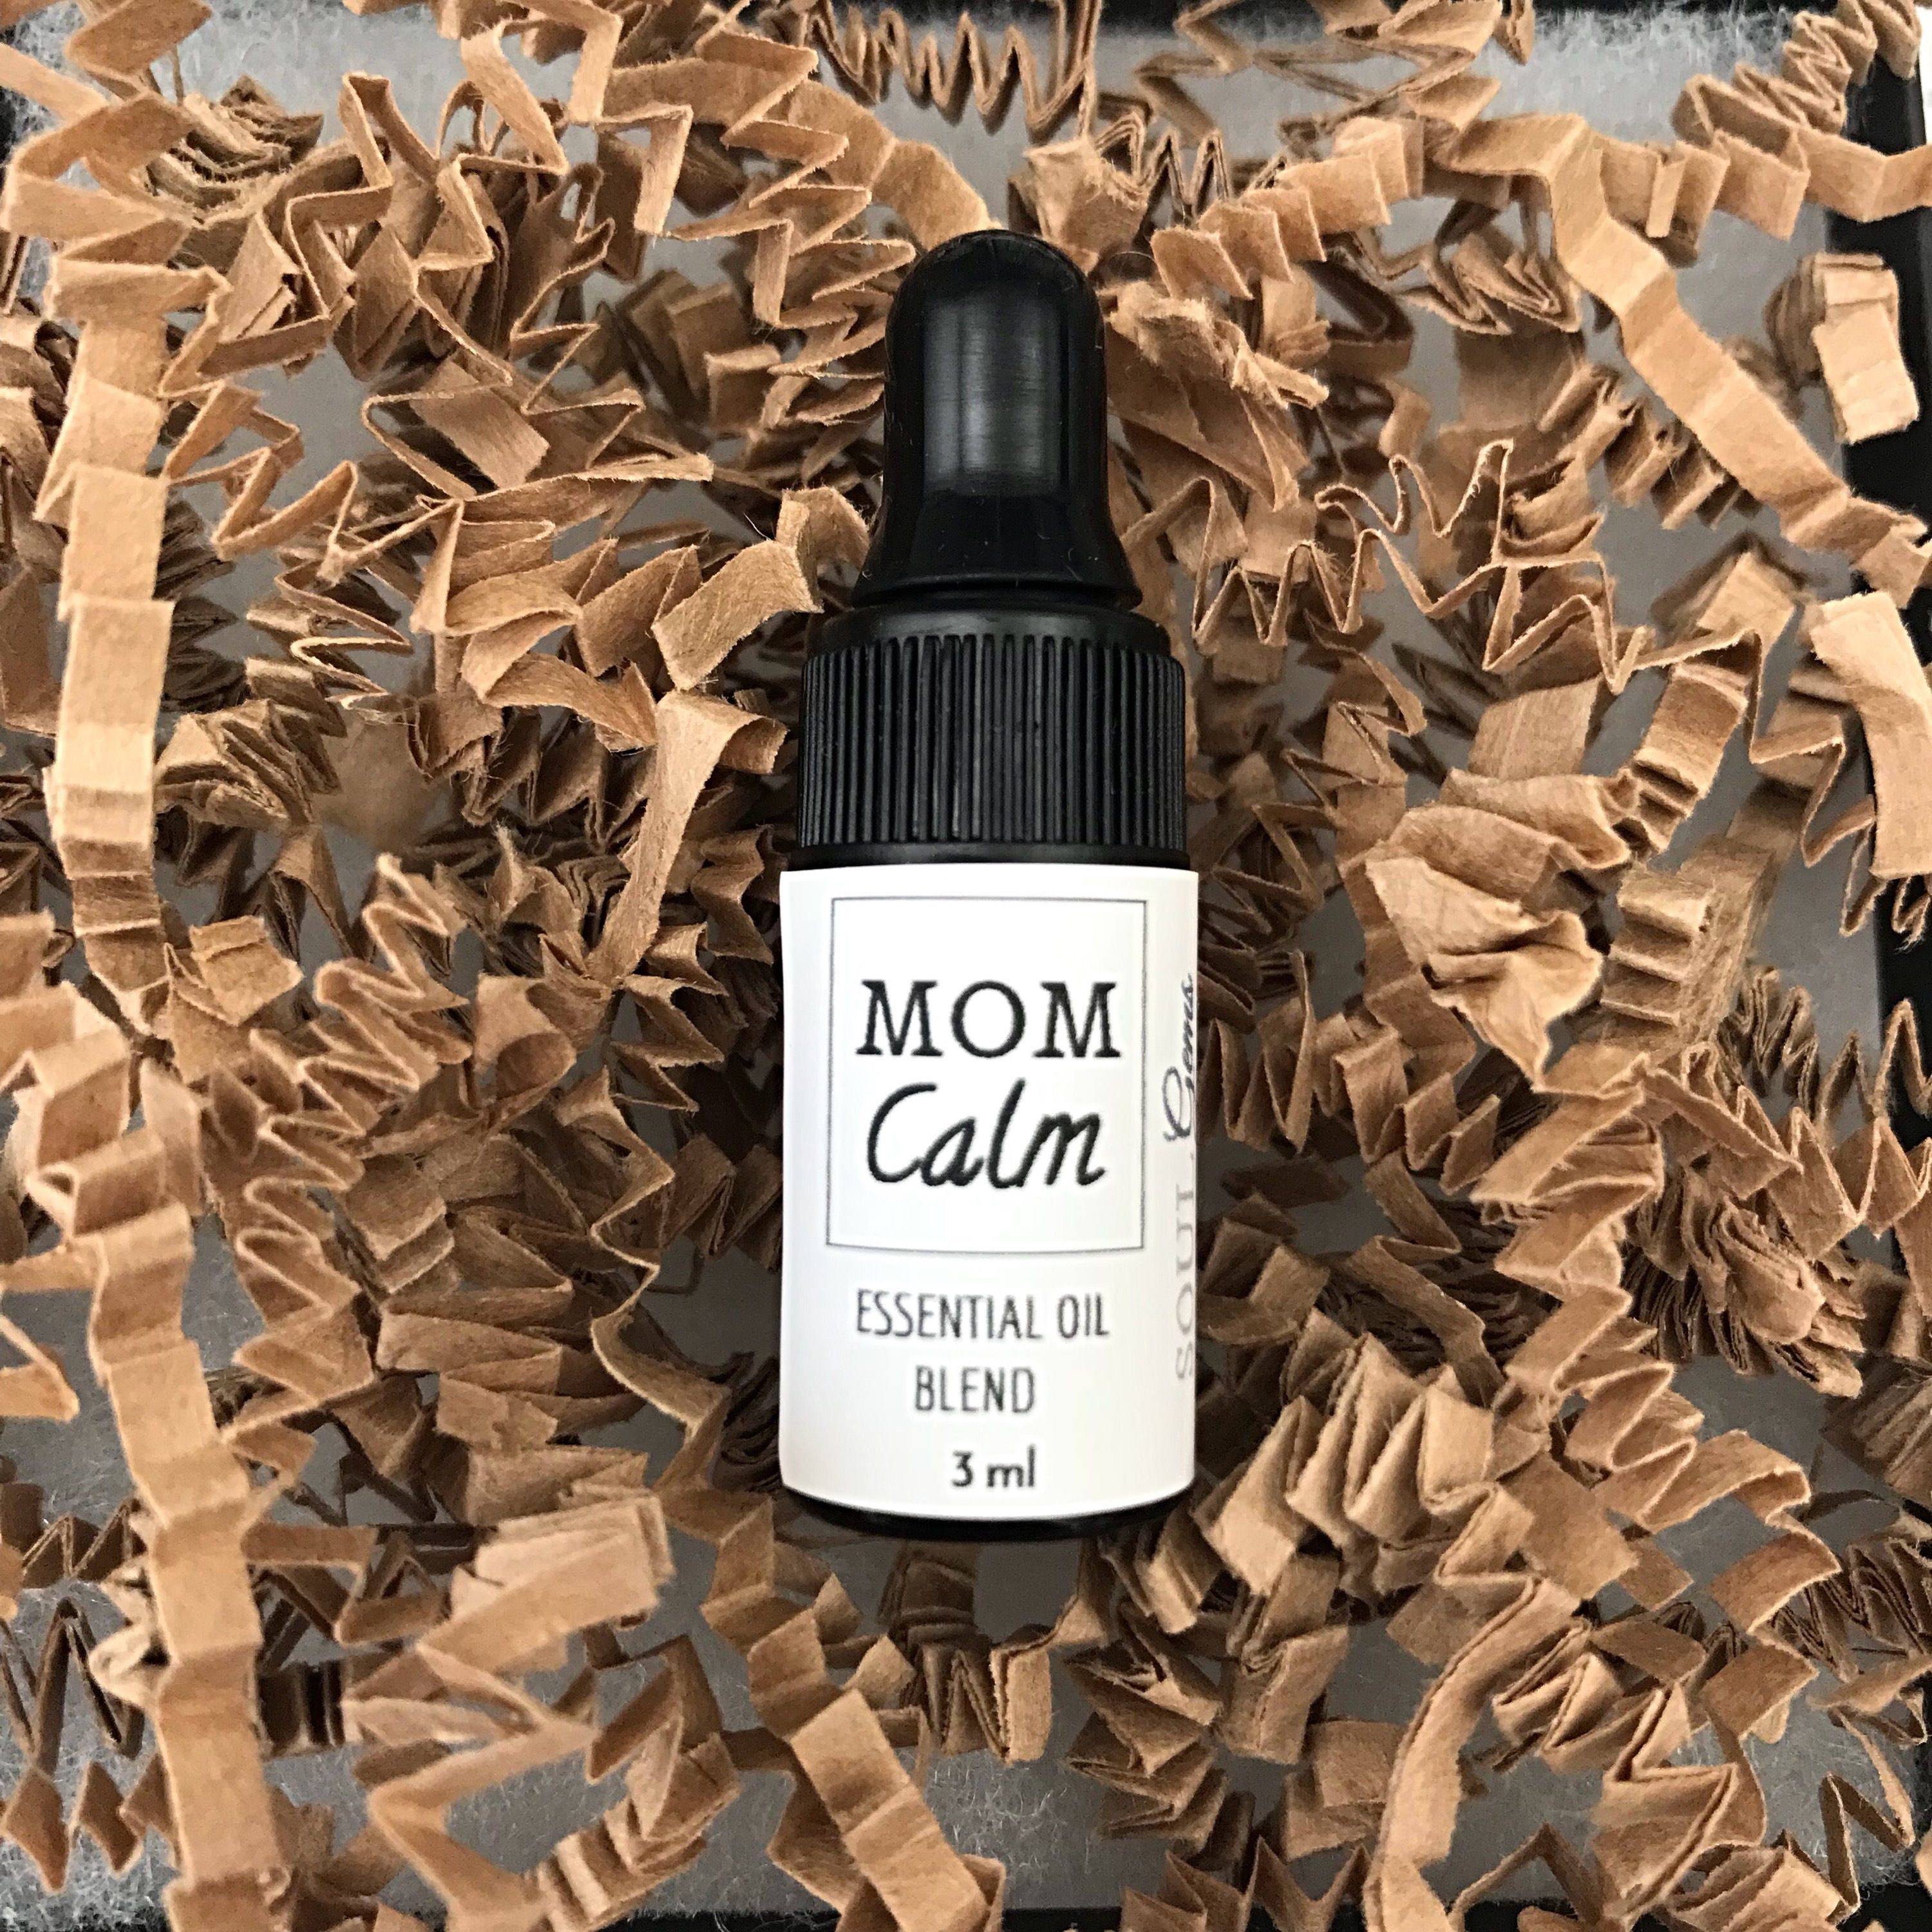 Calming Essential Oil Blend, Mom Calm Aromatherapy, Lavender Gift For Her, Mothers Day